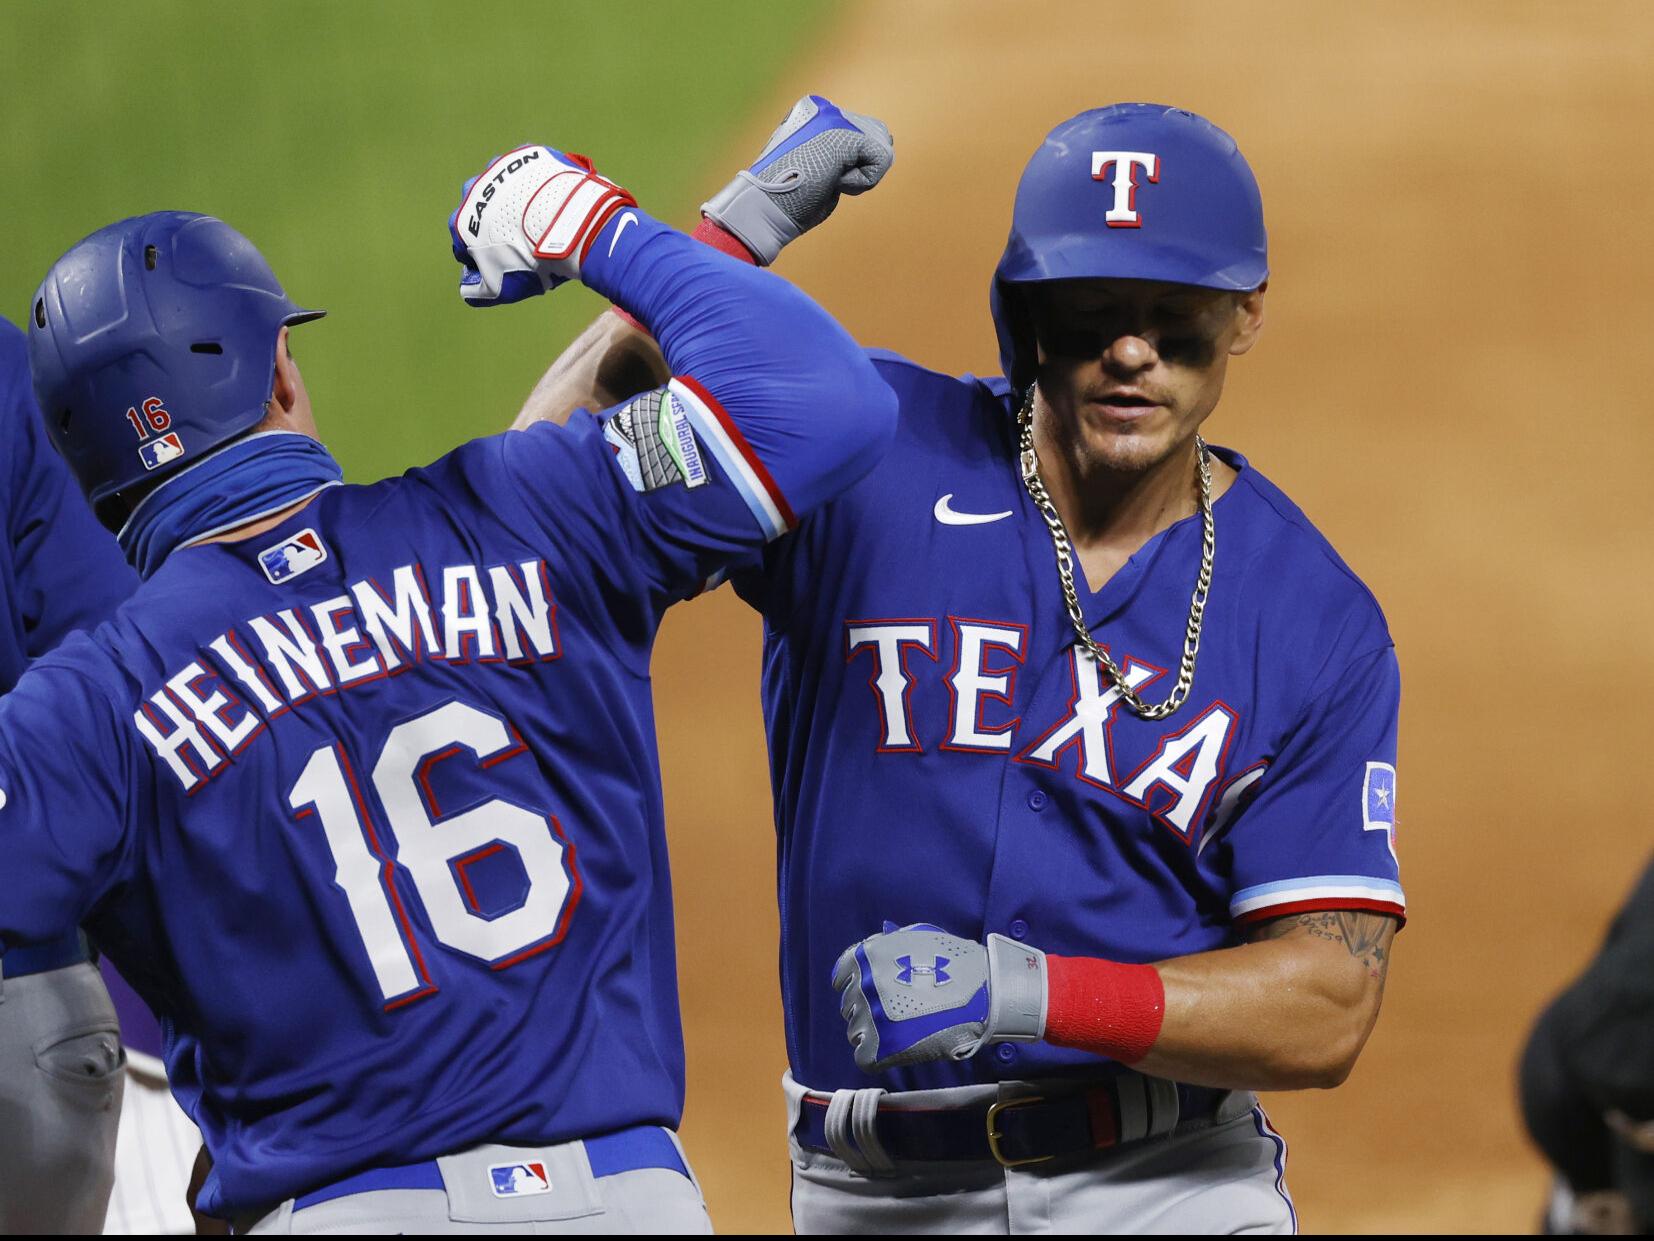 Saturday: Gibson, Dietrich lead Rangers to a 6-4 win over Rockies